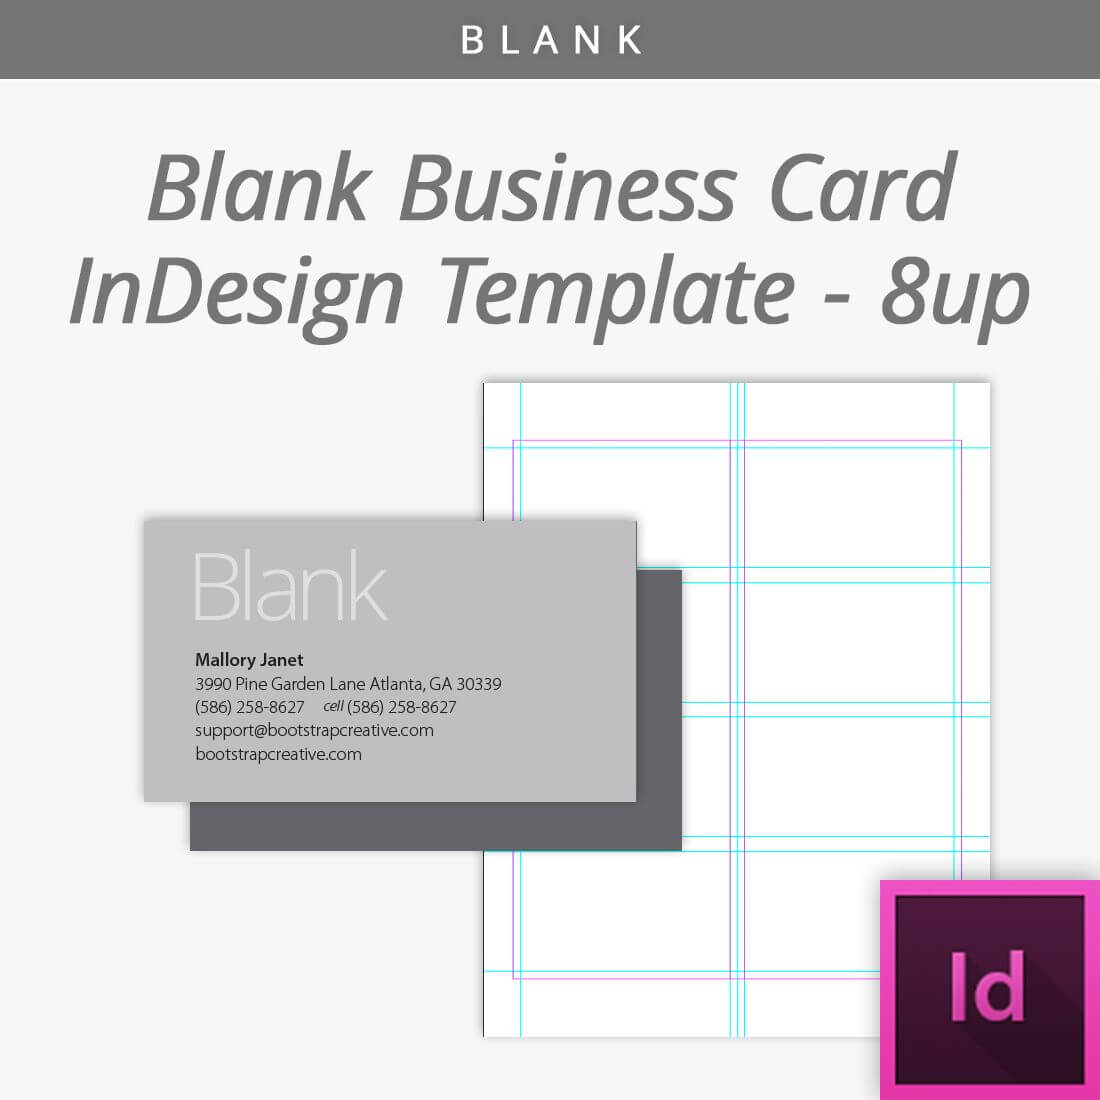 Bootstrap Creative | Blank Business Cards, Free Business For Indesign Birthday Card Template